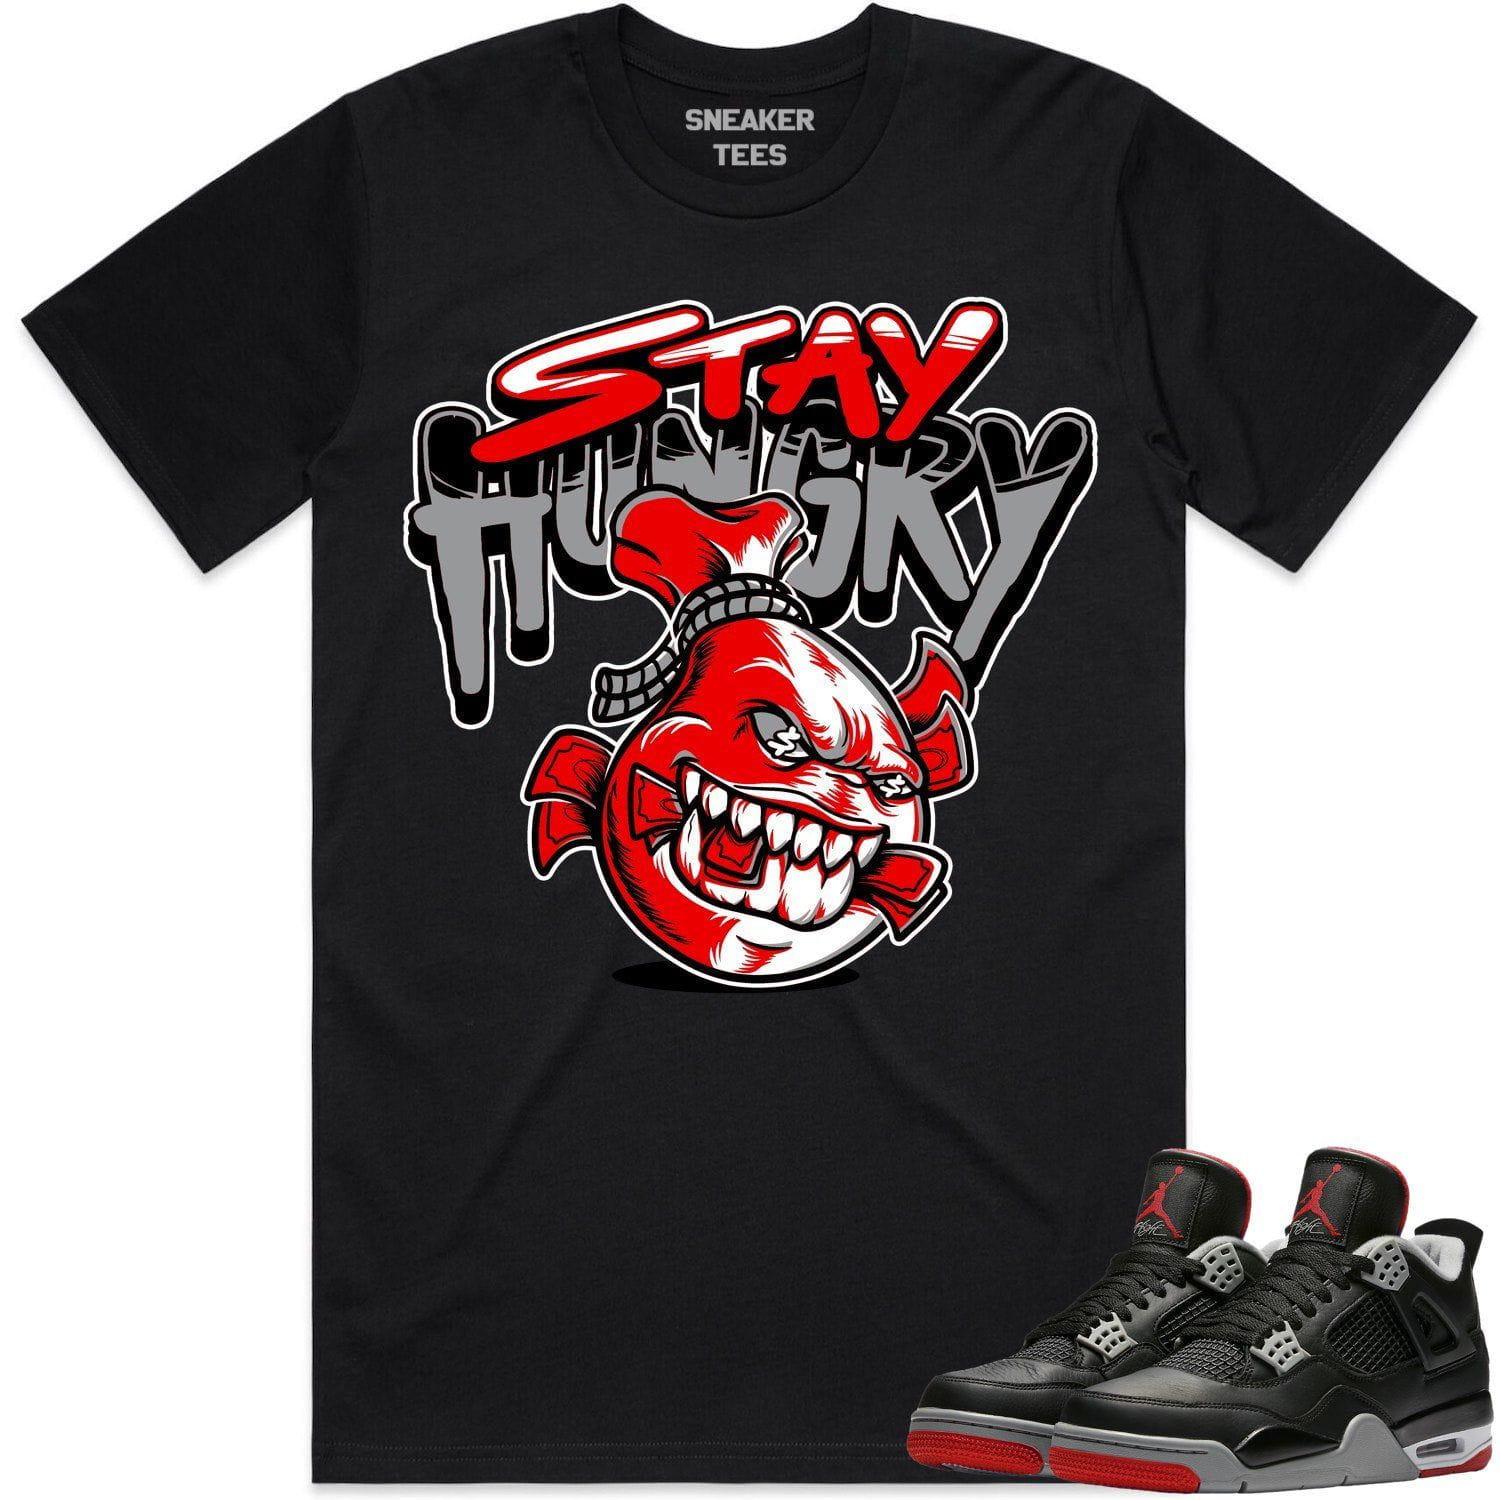 Bred 4s Shirt - Jordan 4 Reimagined Bred Shirts - Stay Hungry